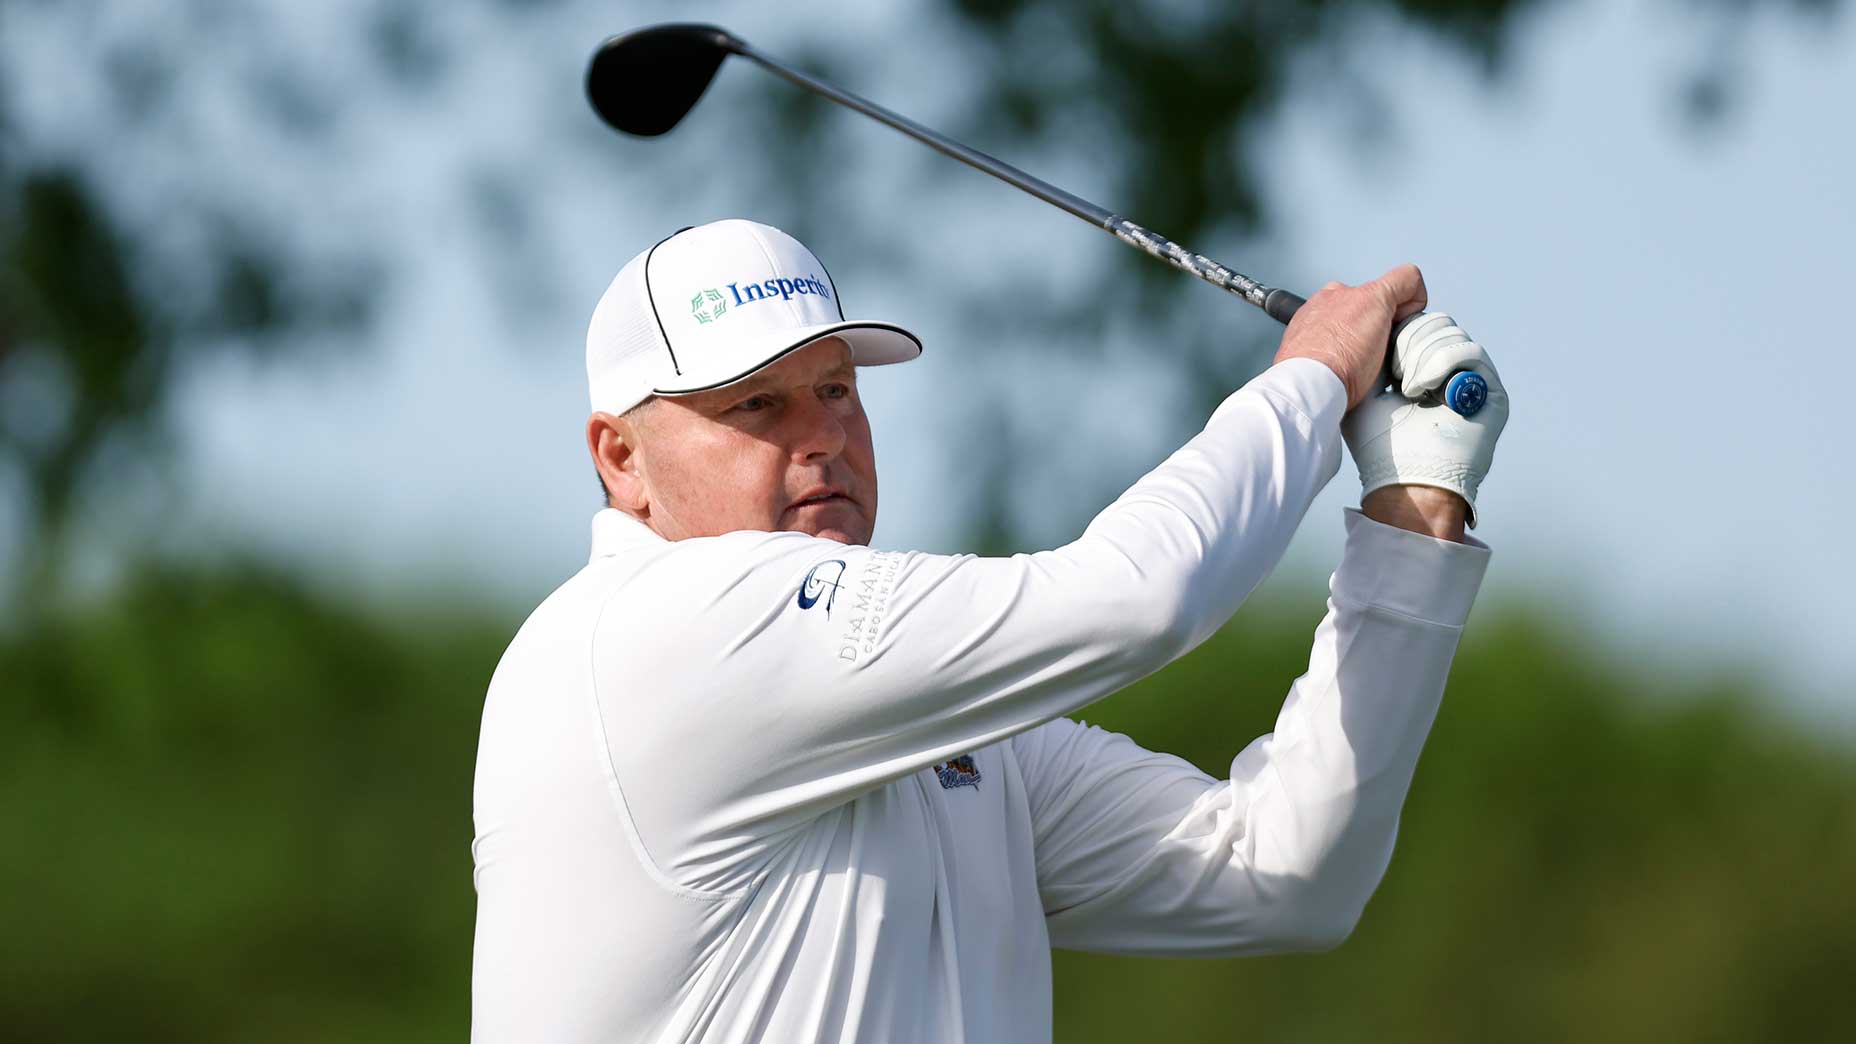 Former MLB pitcher Roger Clemens hits a shot on the seventh hole during the first round of the Invited Celebrity Classic at Las Colinas Country Club on April 21, 2023 in Irving, Texas.